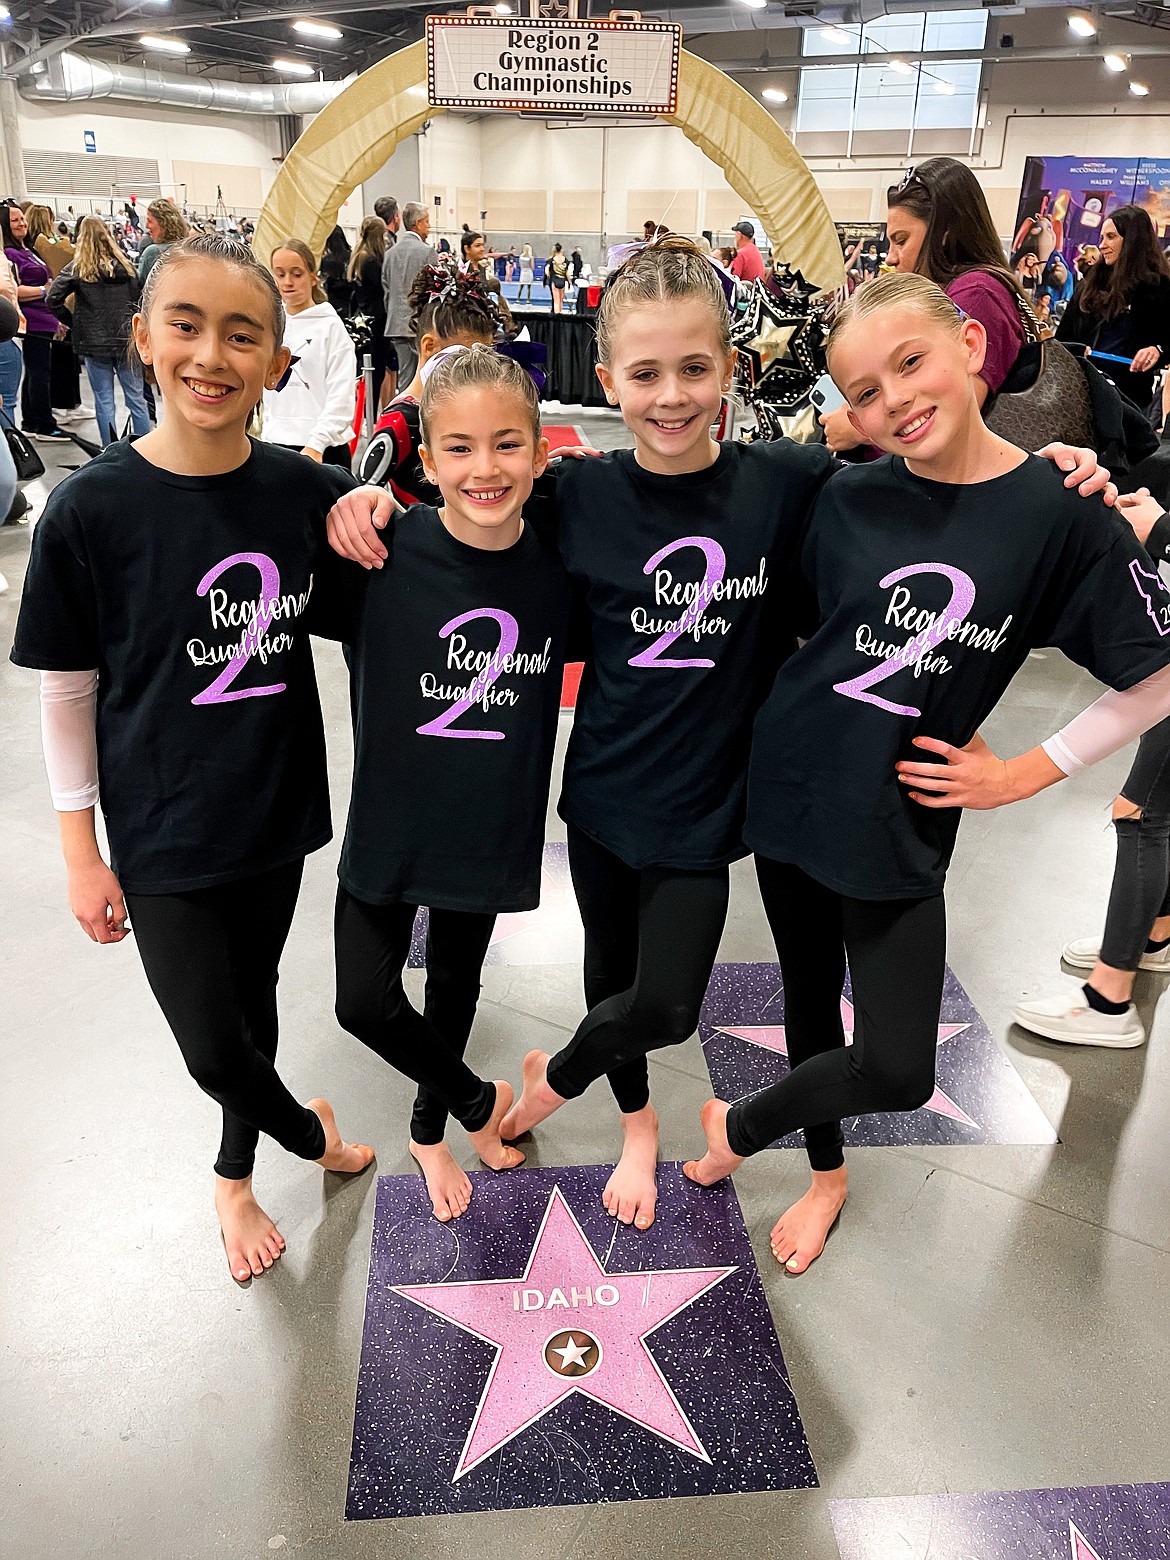 Courtesy photo
Avant Coeur Level 7 qualifiers competed at the Region 2 Regional Championships in Vancouver, Wash. From left are Addy Prescott, Georgia Carr, Claire Traub and Avery Hammons.